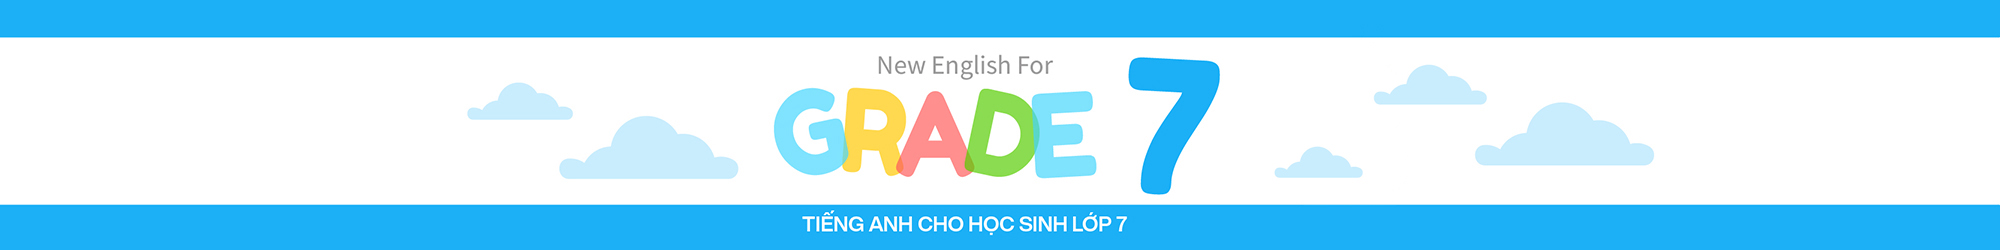 NEW ENGLISH FOR GRADE 7